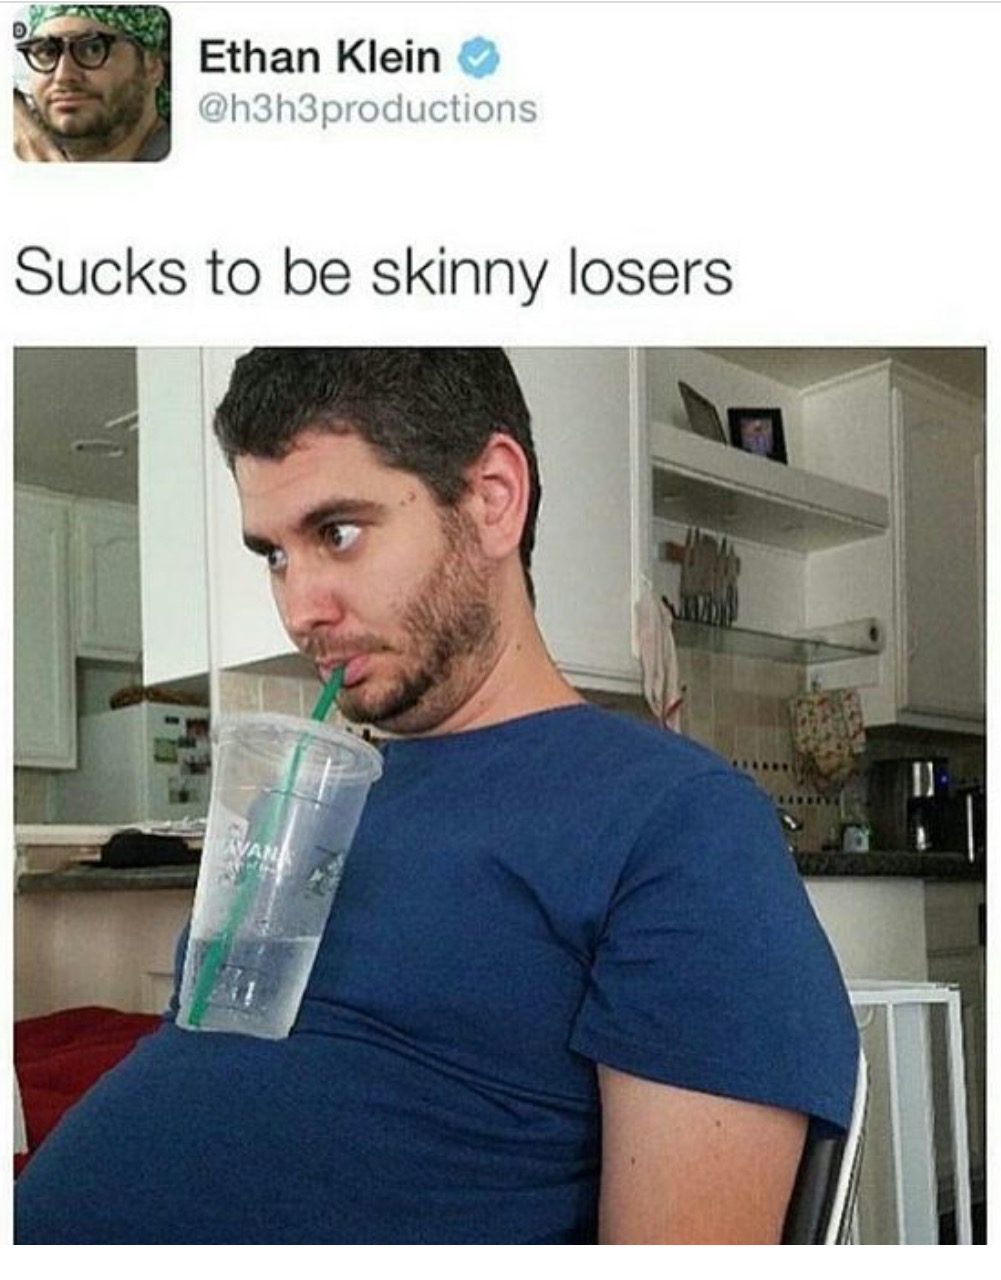 memes - sucks to be skinny losers - Ethan Klein Sucks to be skinny losers